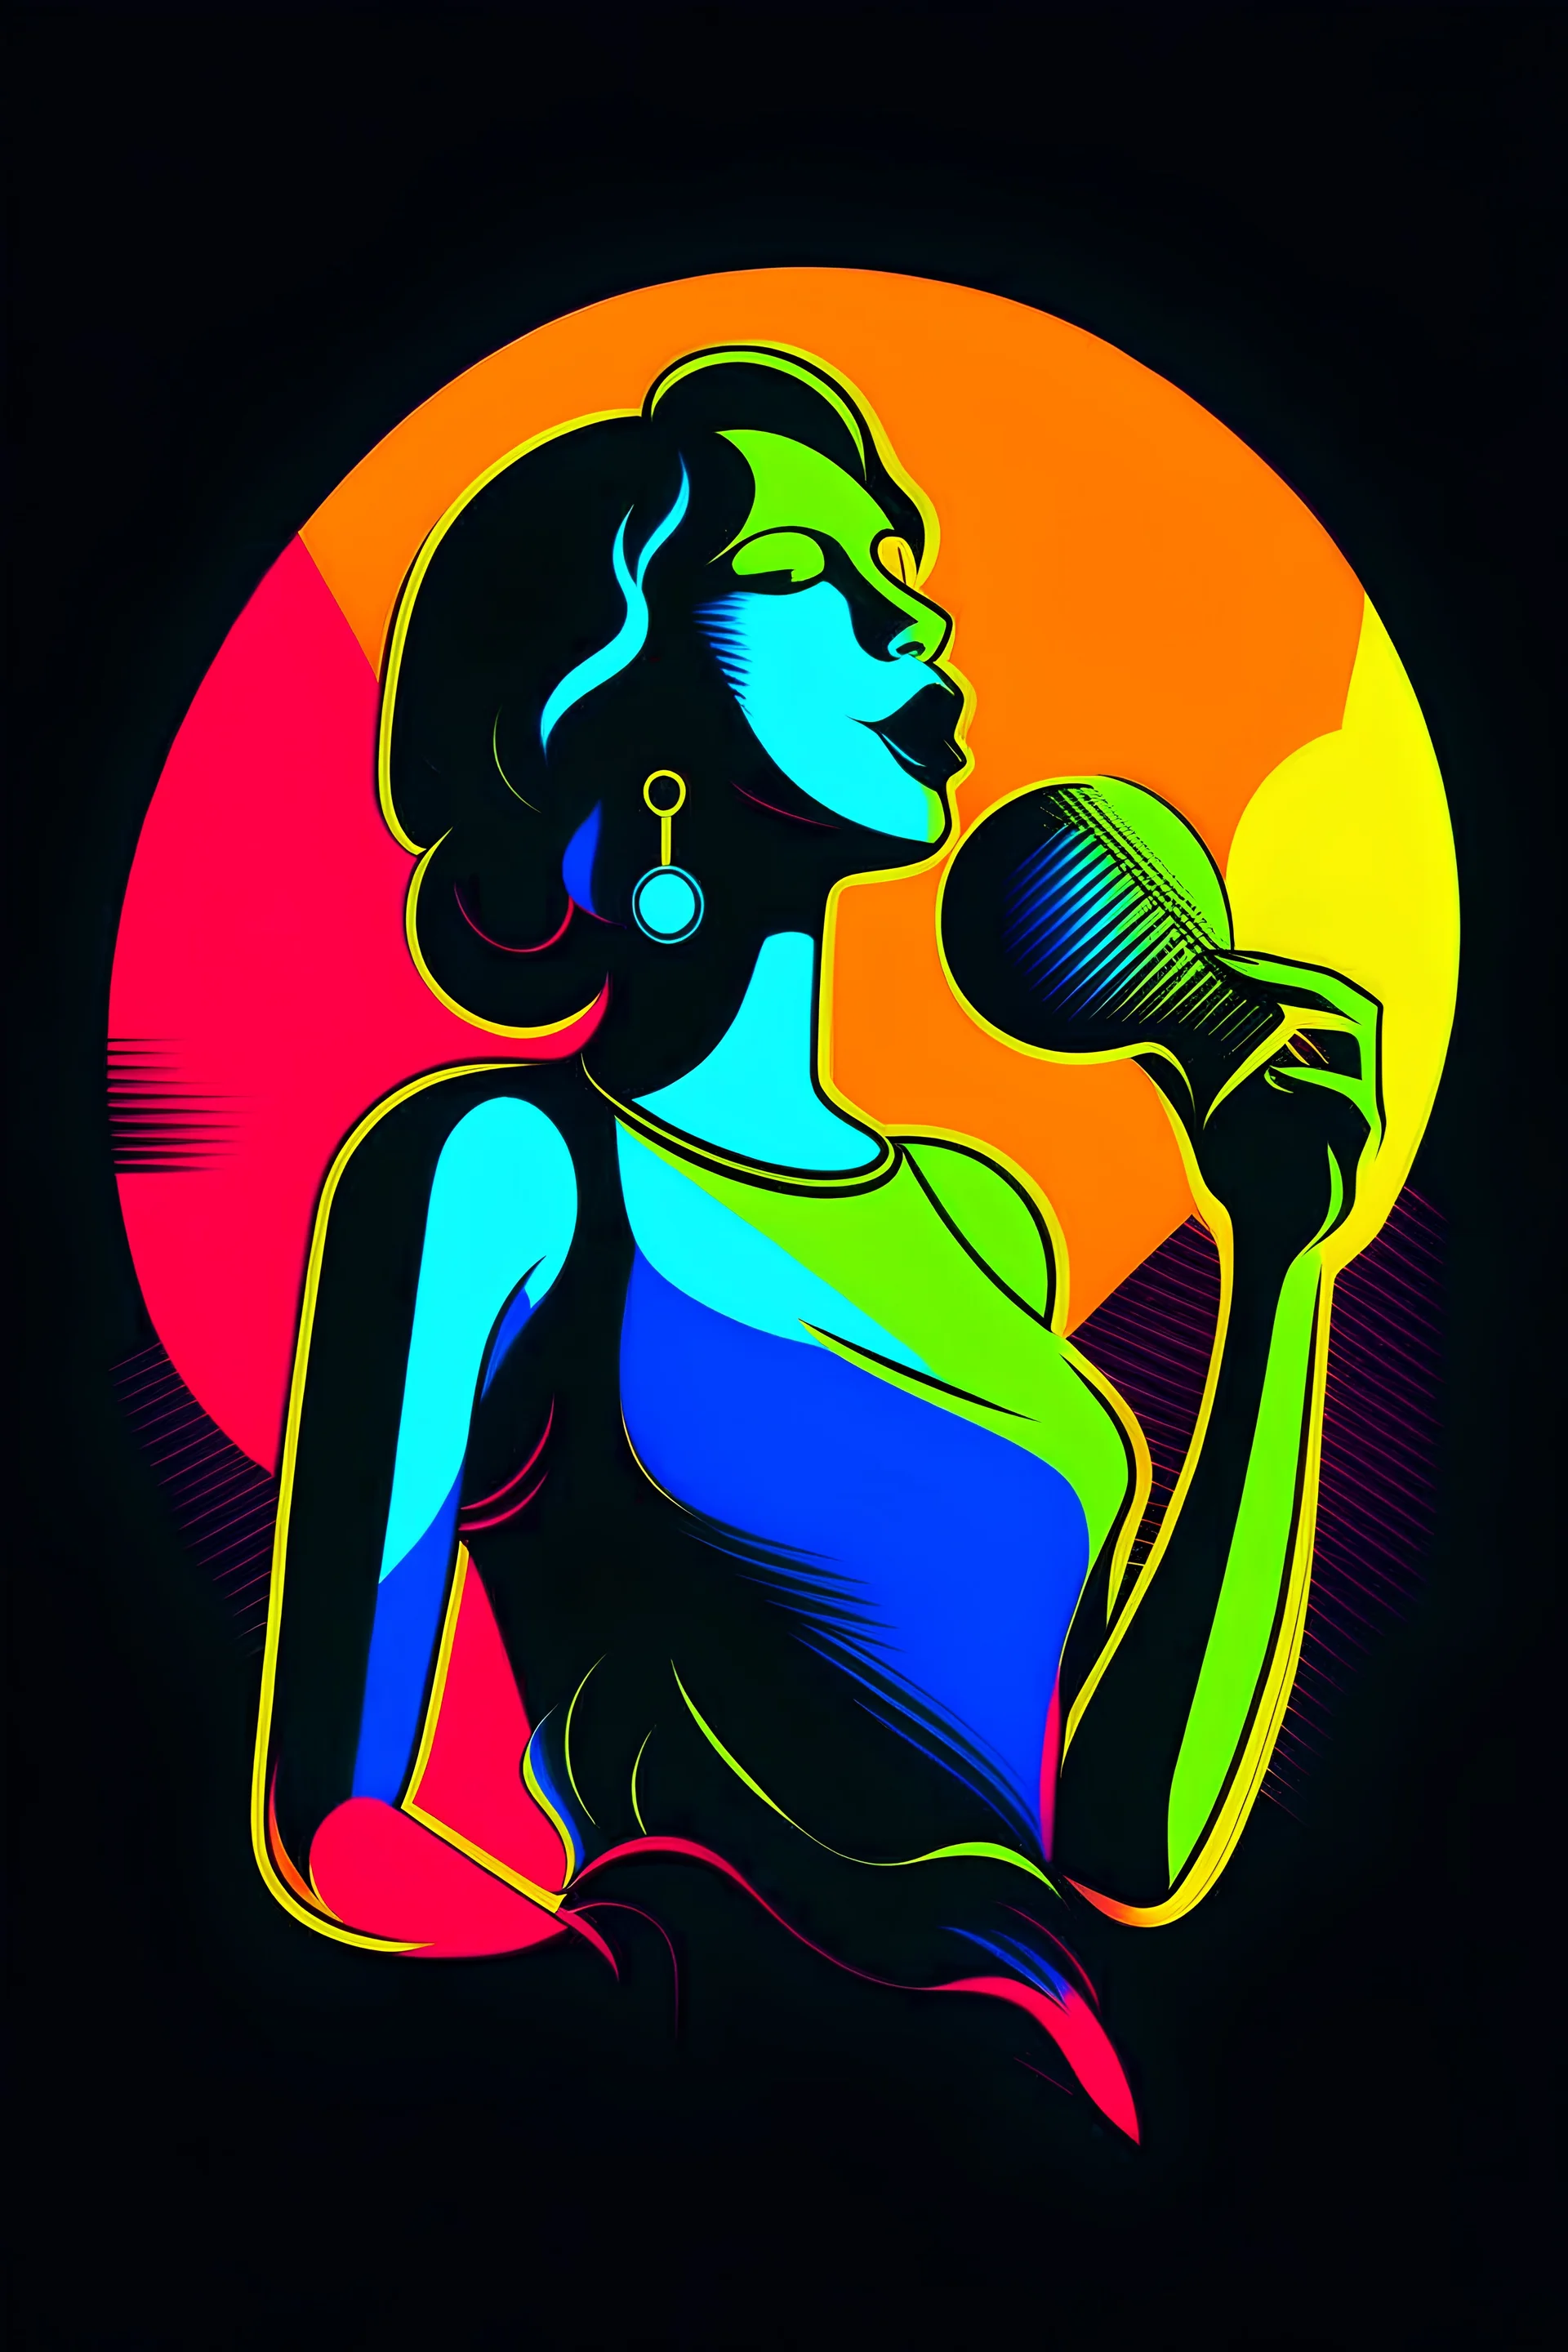 Logo: A stylized silhouette of a woman with multiple arms, each holding a different neon-lit object (microphone, glass, dice). Design Style: Pop art, vibrant colors.